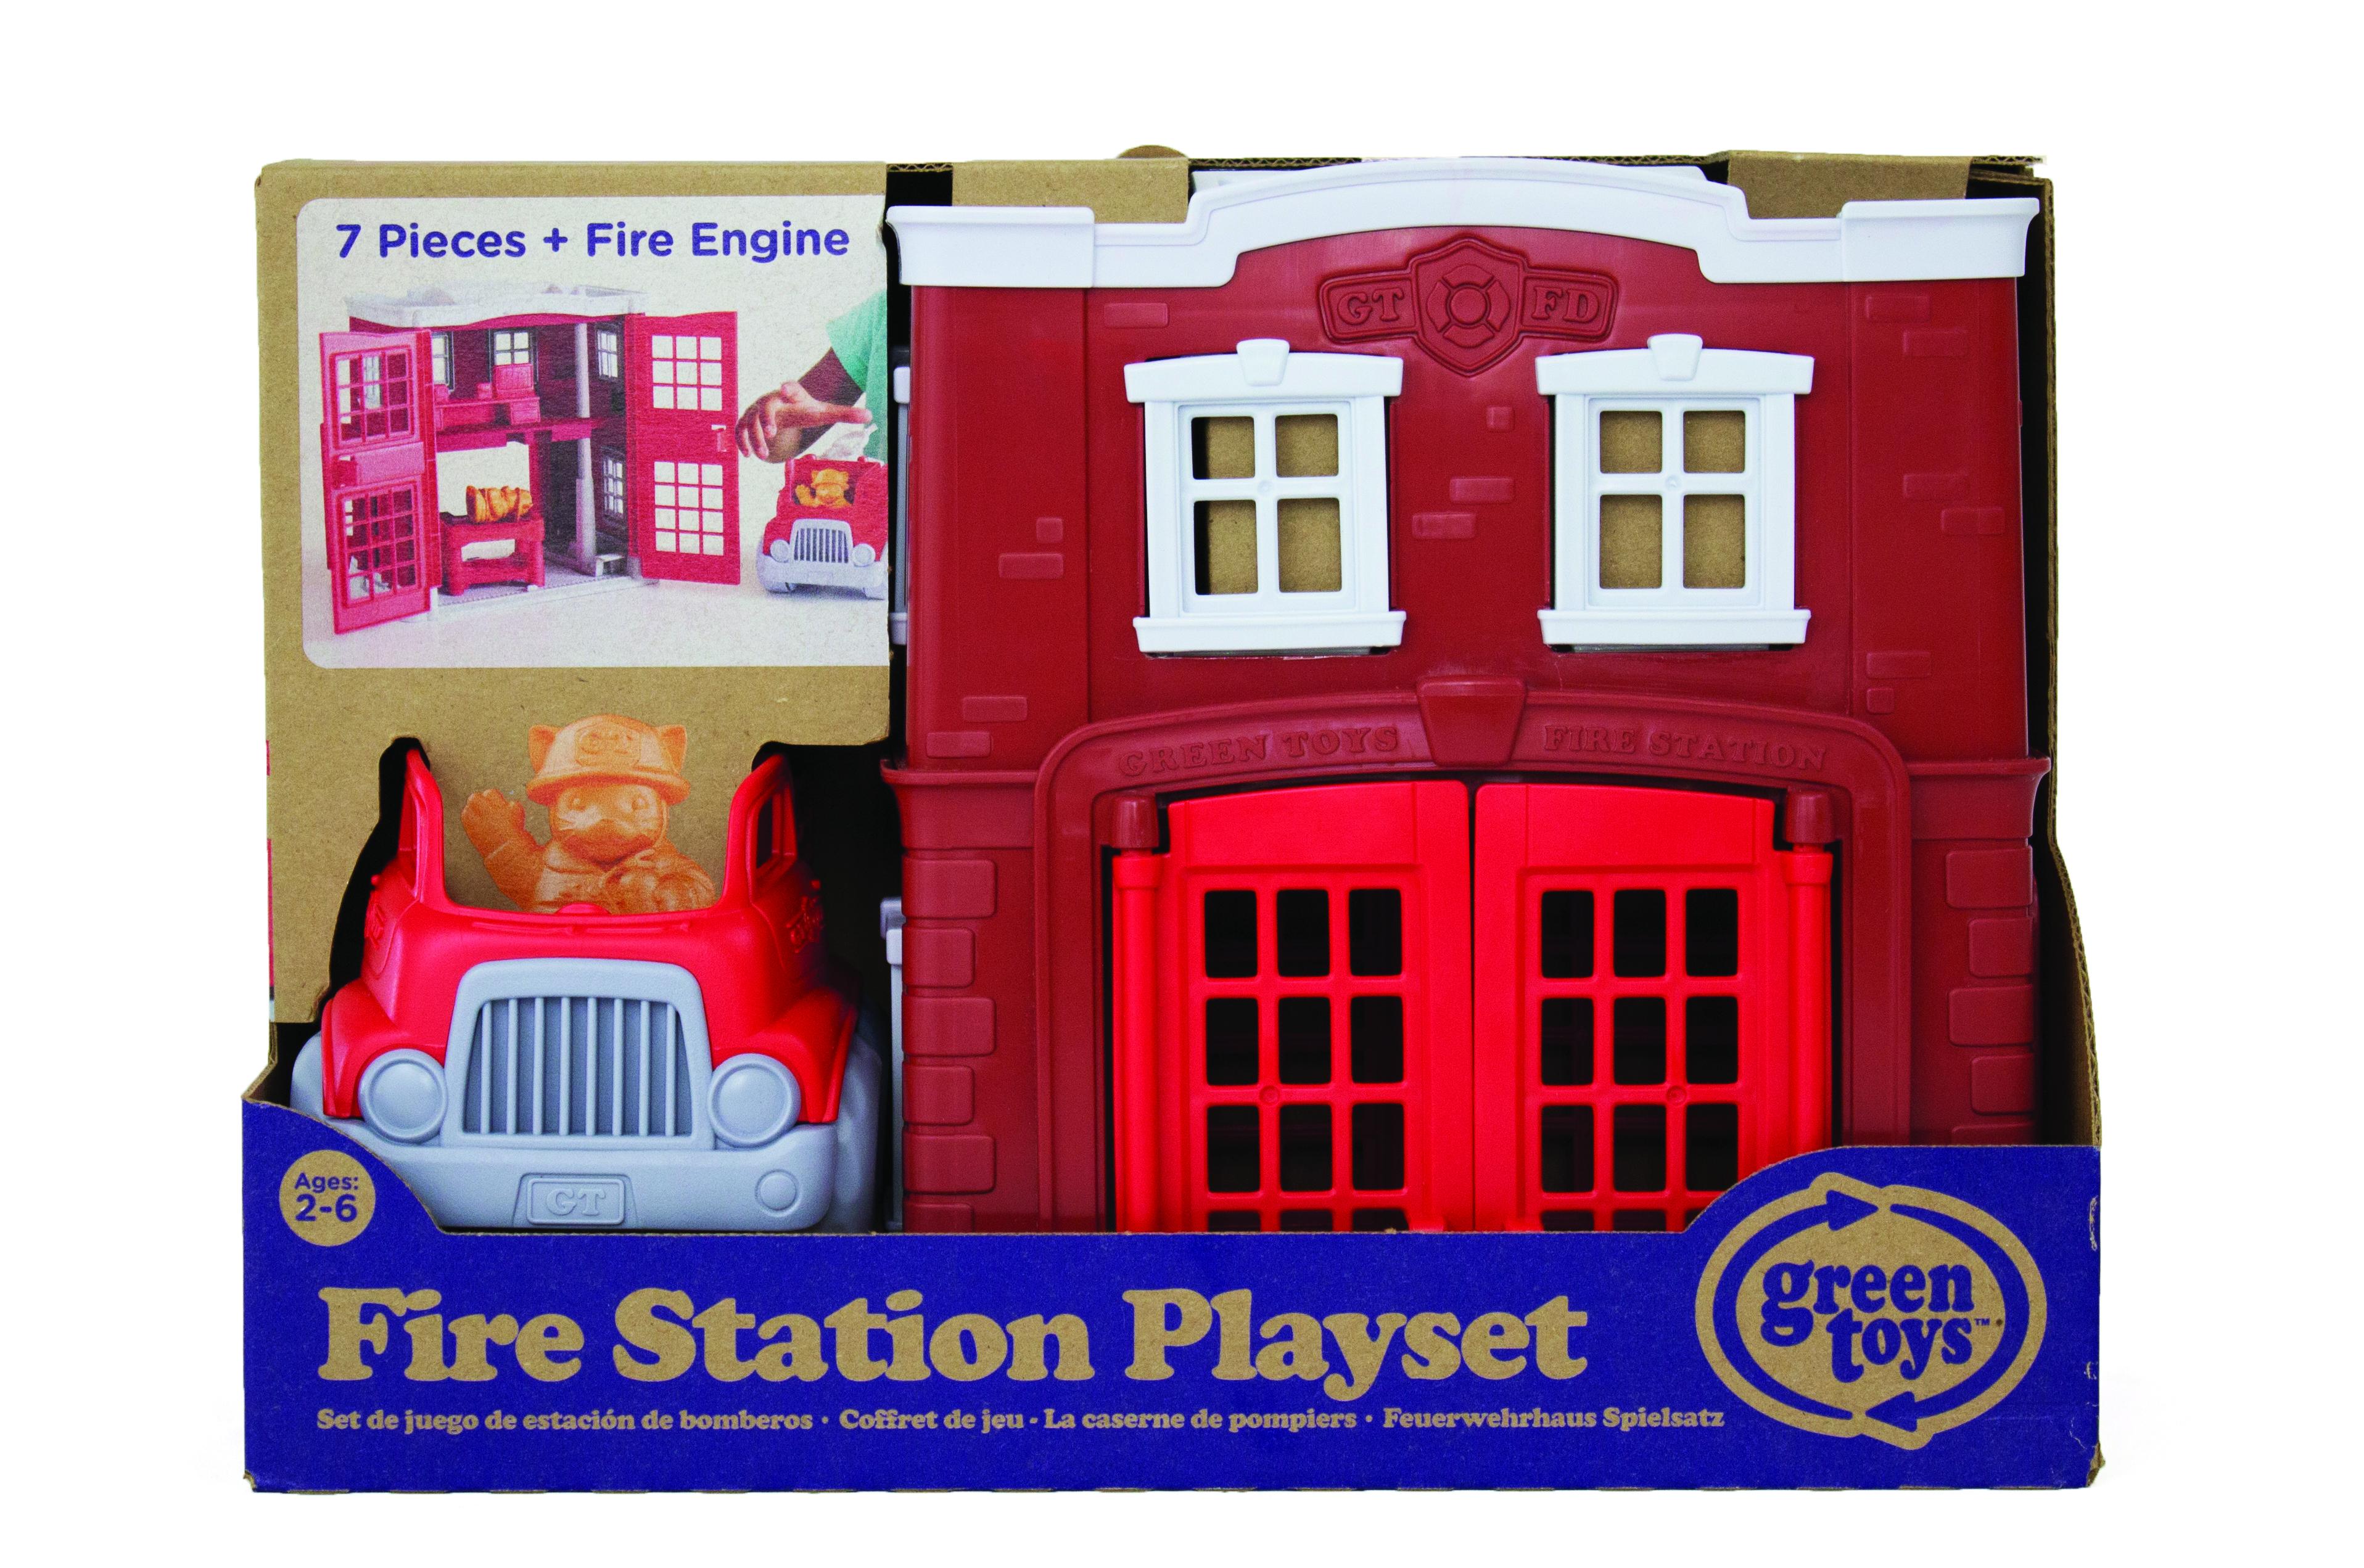 Fire station play-set made from recycled plastic with a red fire engine in manufacturer's packaging.